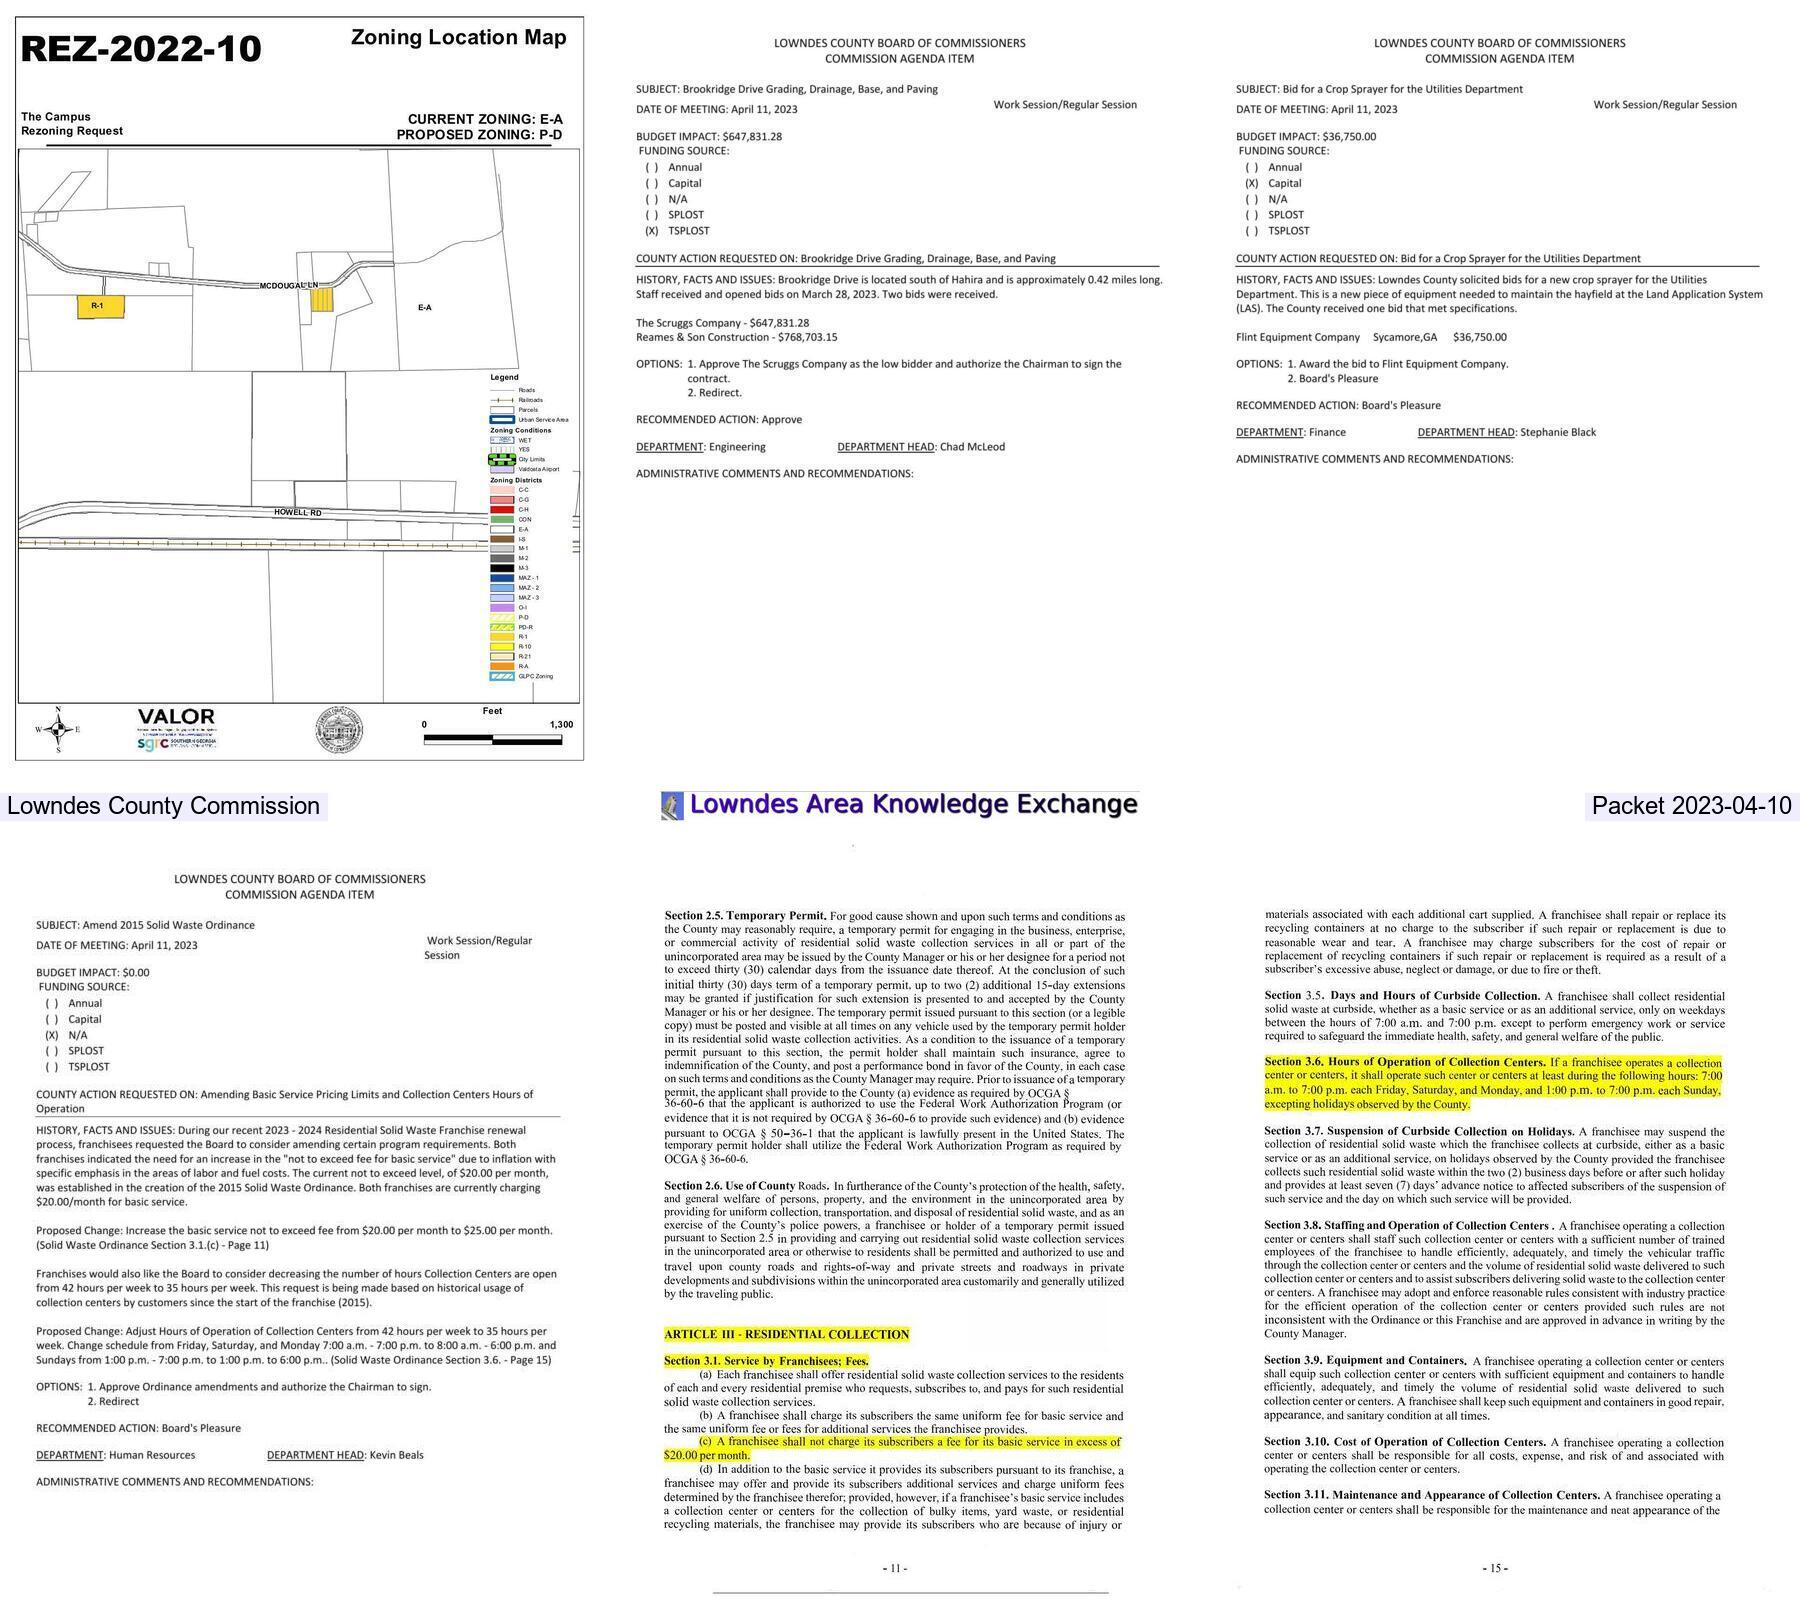 [Collage, LCC Packet 2023-04-10]